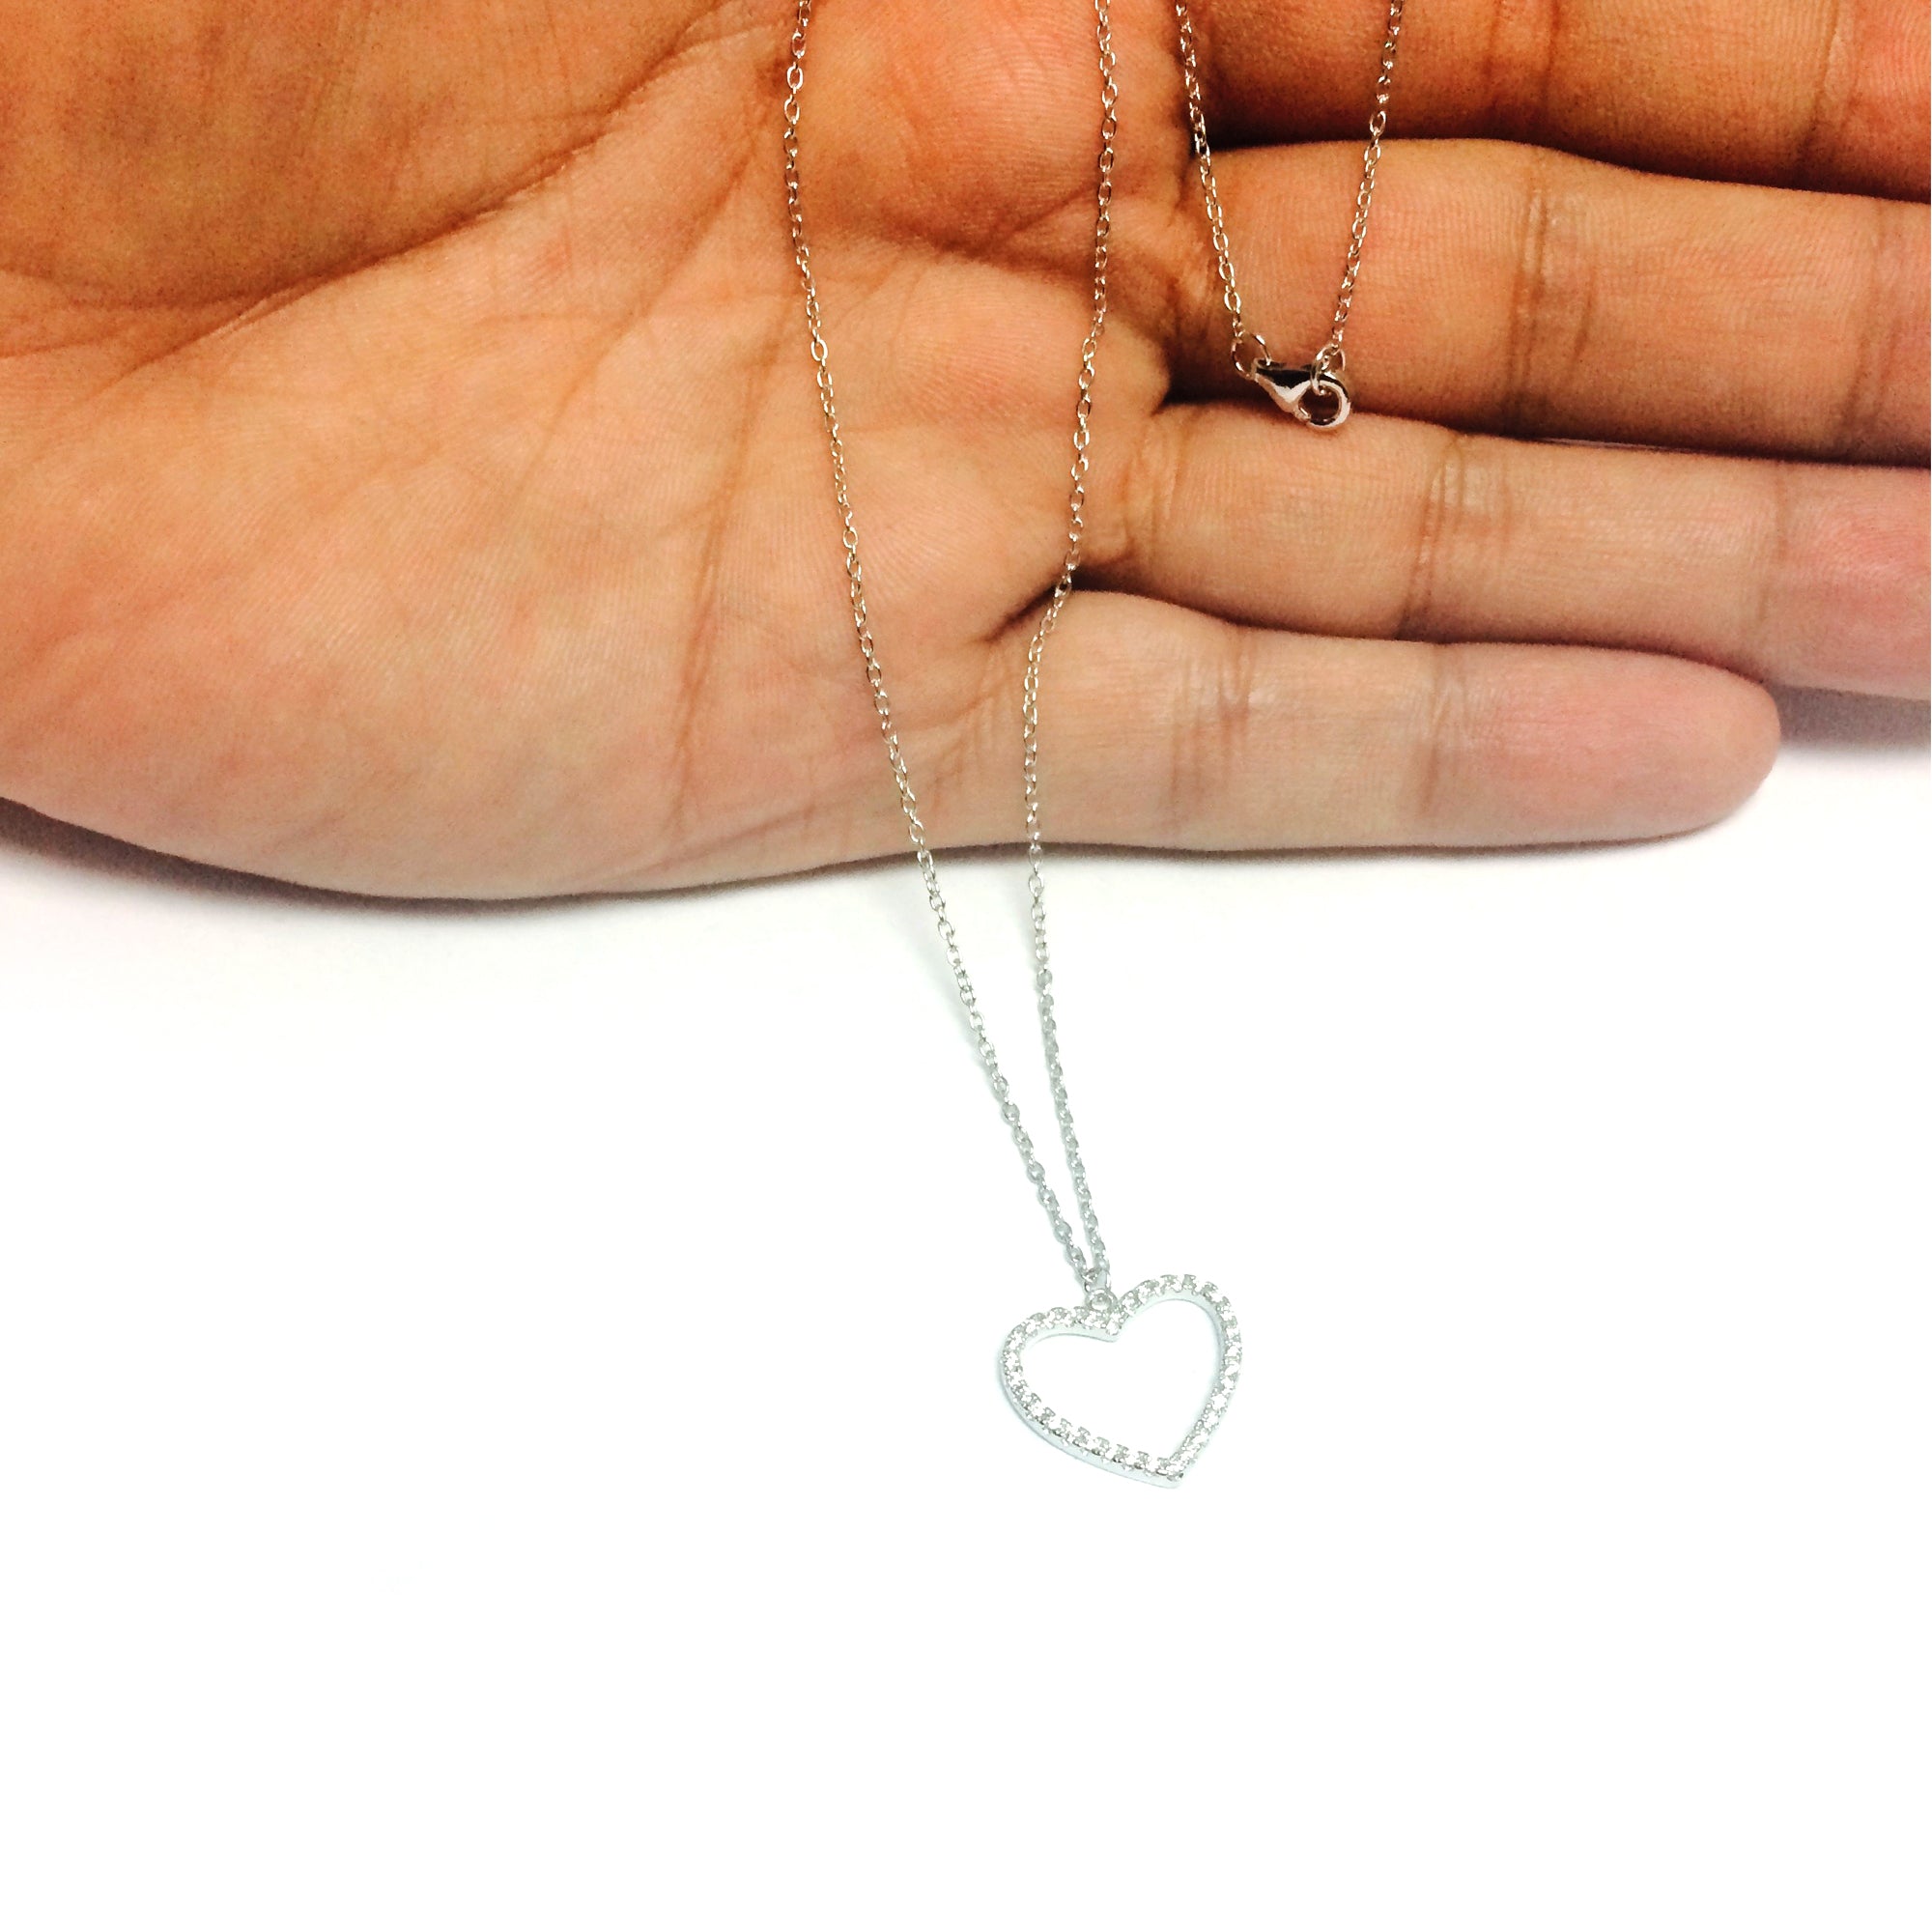 Heart And CZ Necklace In Sterling Silver, 18" fine designer jewelry for men and women